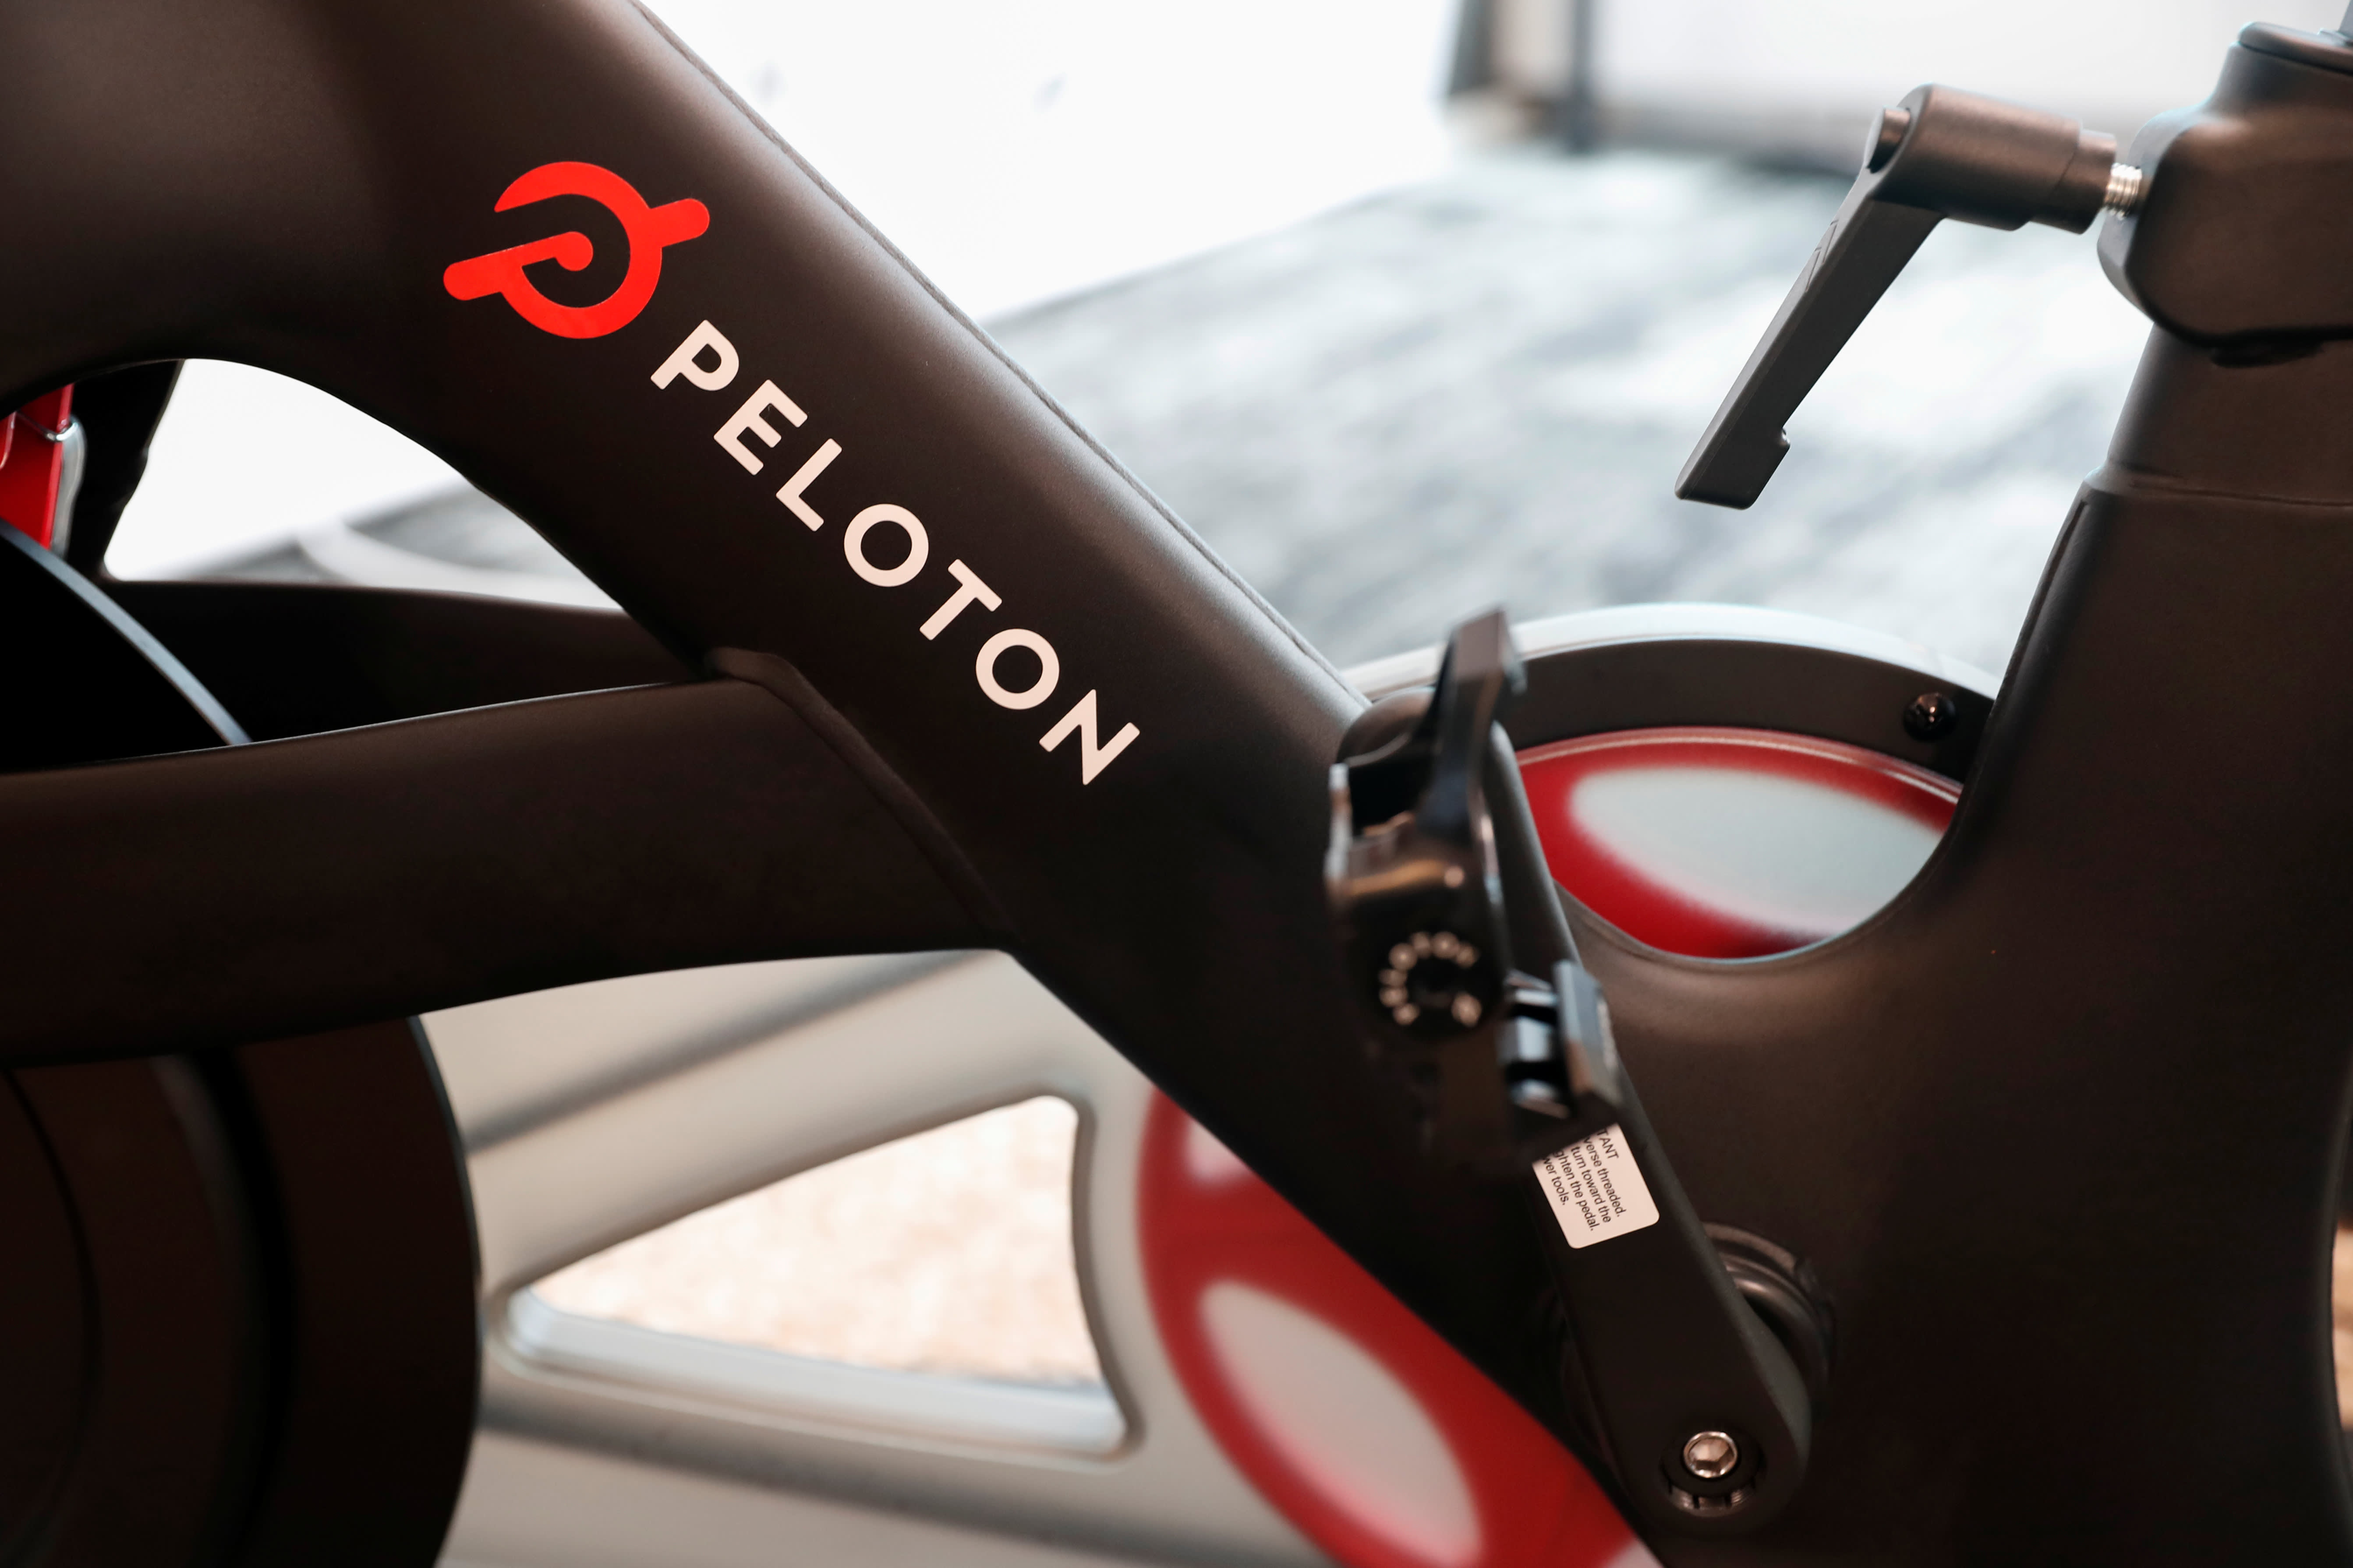 Peloton shares up after CEO says it must ‘right-size’ production levels consider layoffs – CNBC